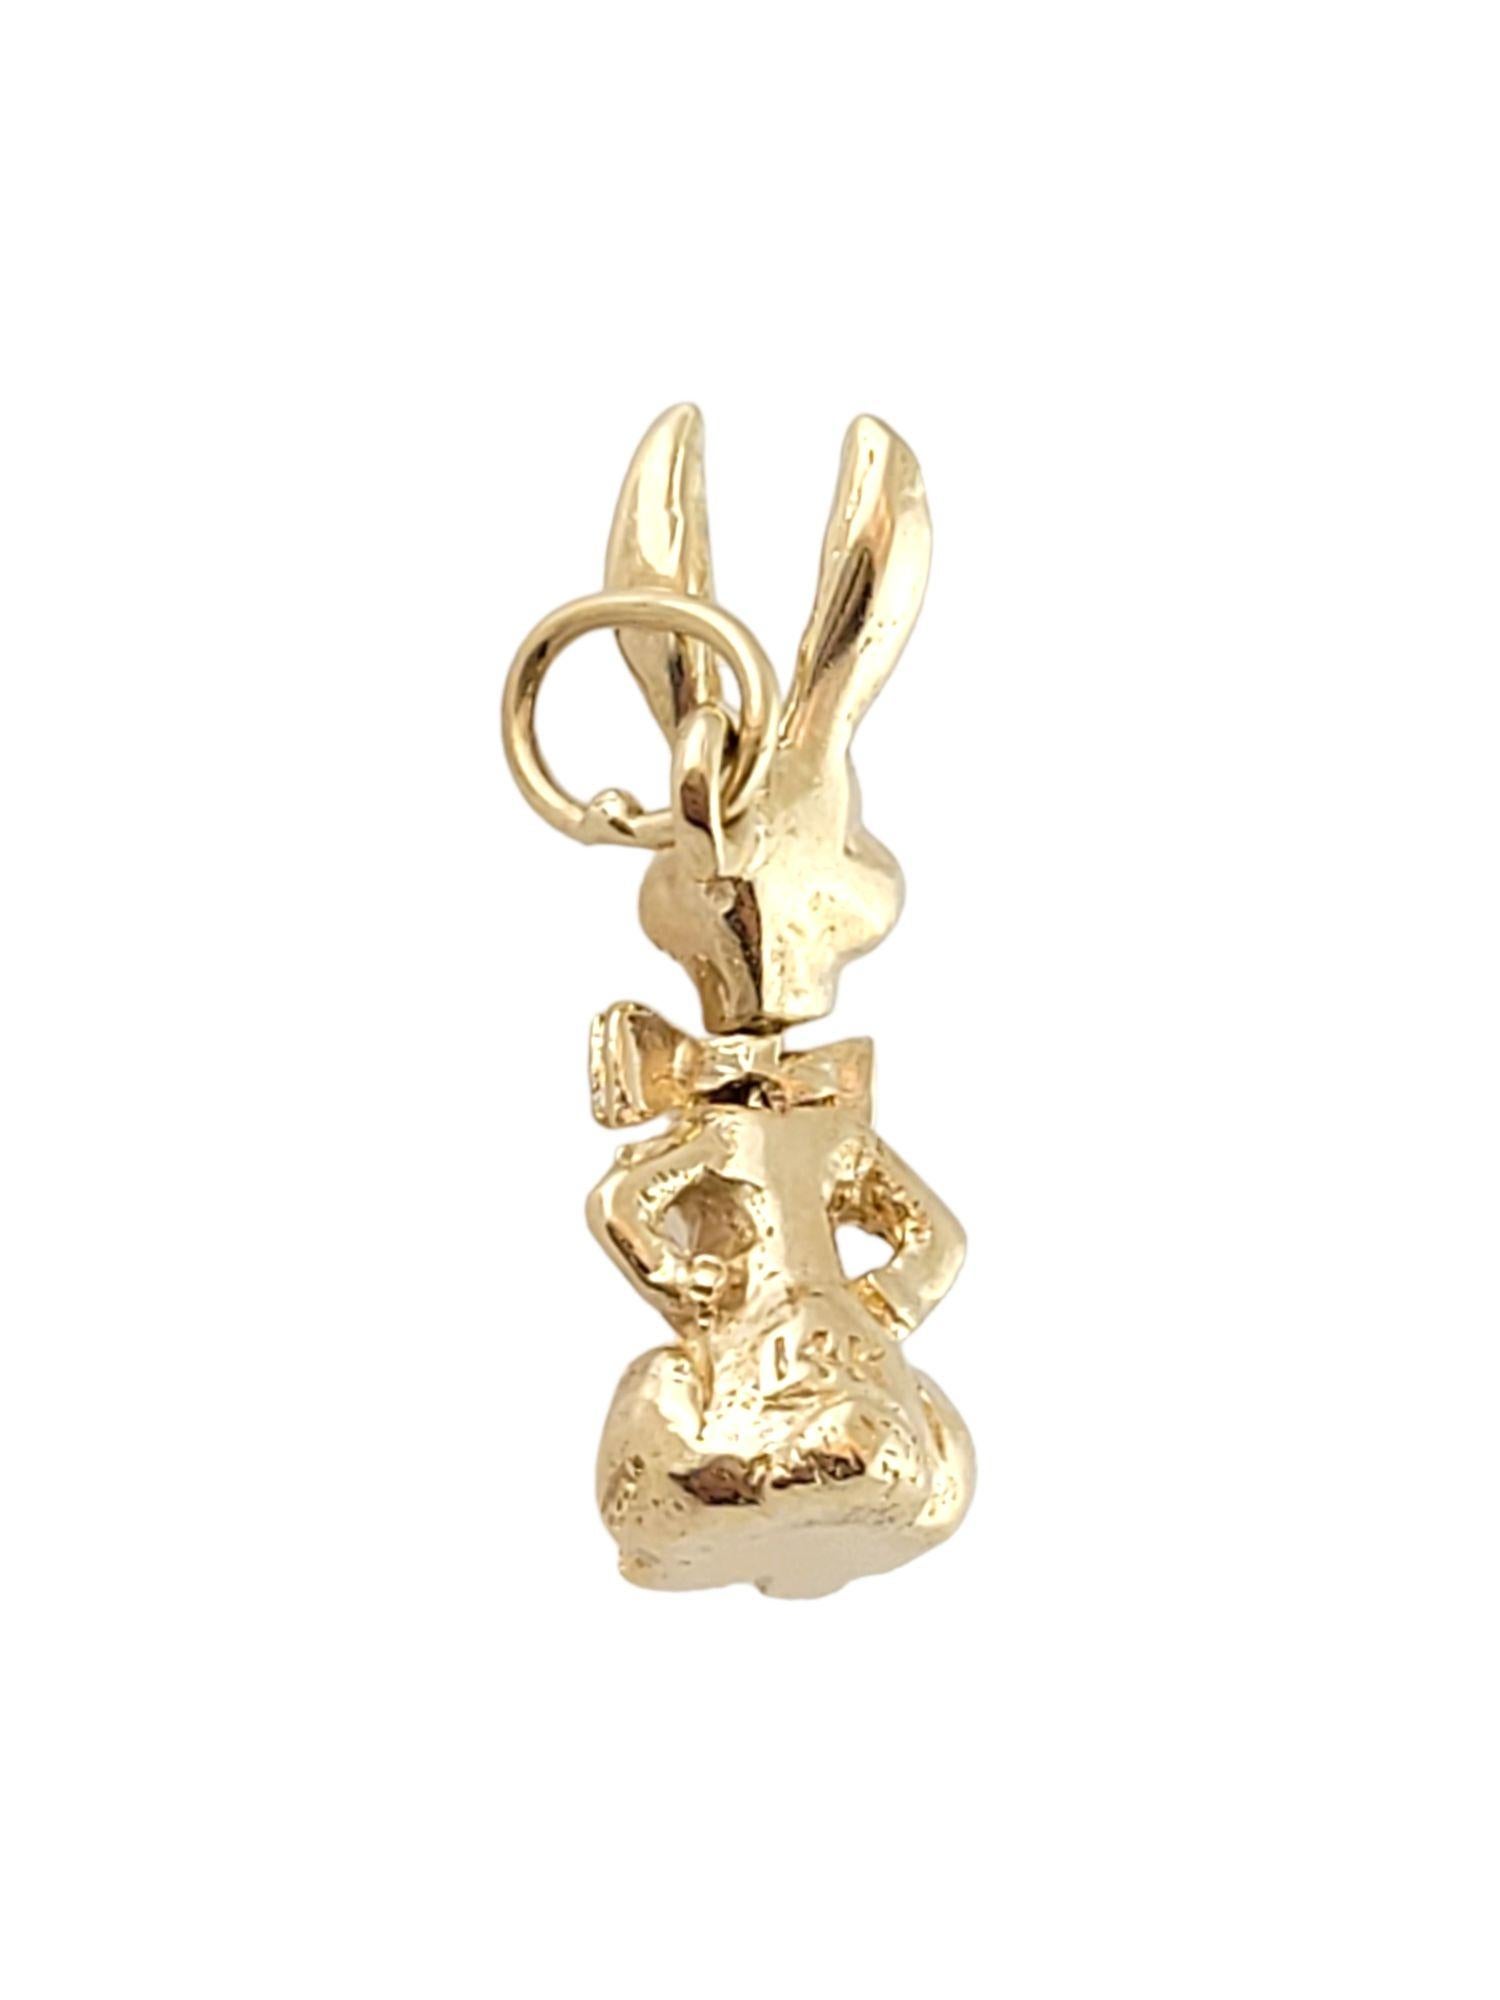 Vintage 14K Yellow Gold Bunny Charm

This 14K gold bunny charm is absolutely adorable!

Size: 22mm X 7.5mm X 6.5mm

Weight: .2 g/ 2.0 dwt

Hallmark: 14K

Very good condition, professionally polished.

Will come packaged in a gift box or pouch (when